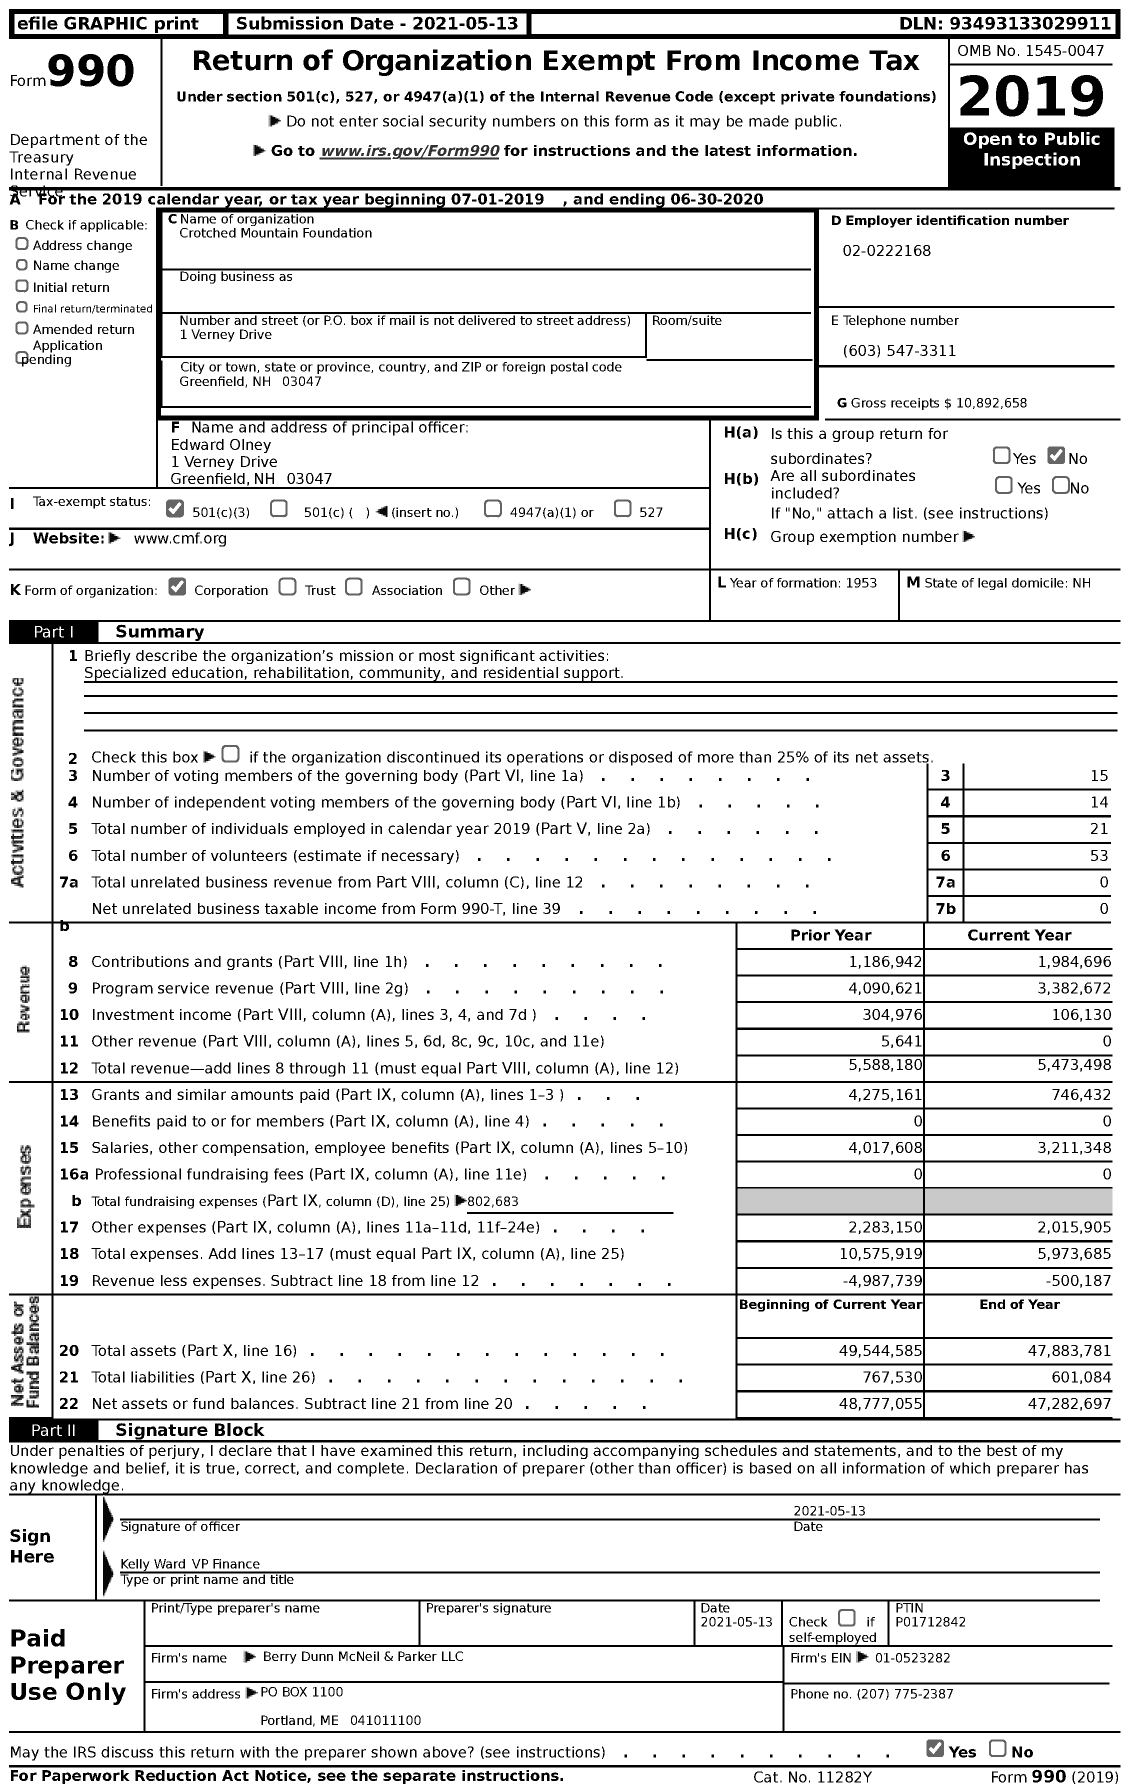 Image of first page of 2019 Form 990 for Crotched Mountain Foundation (CMF)